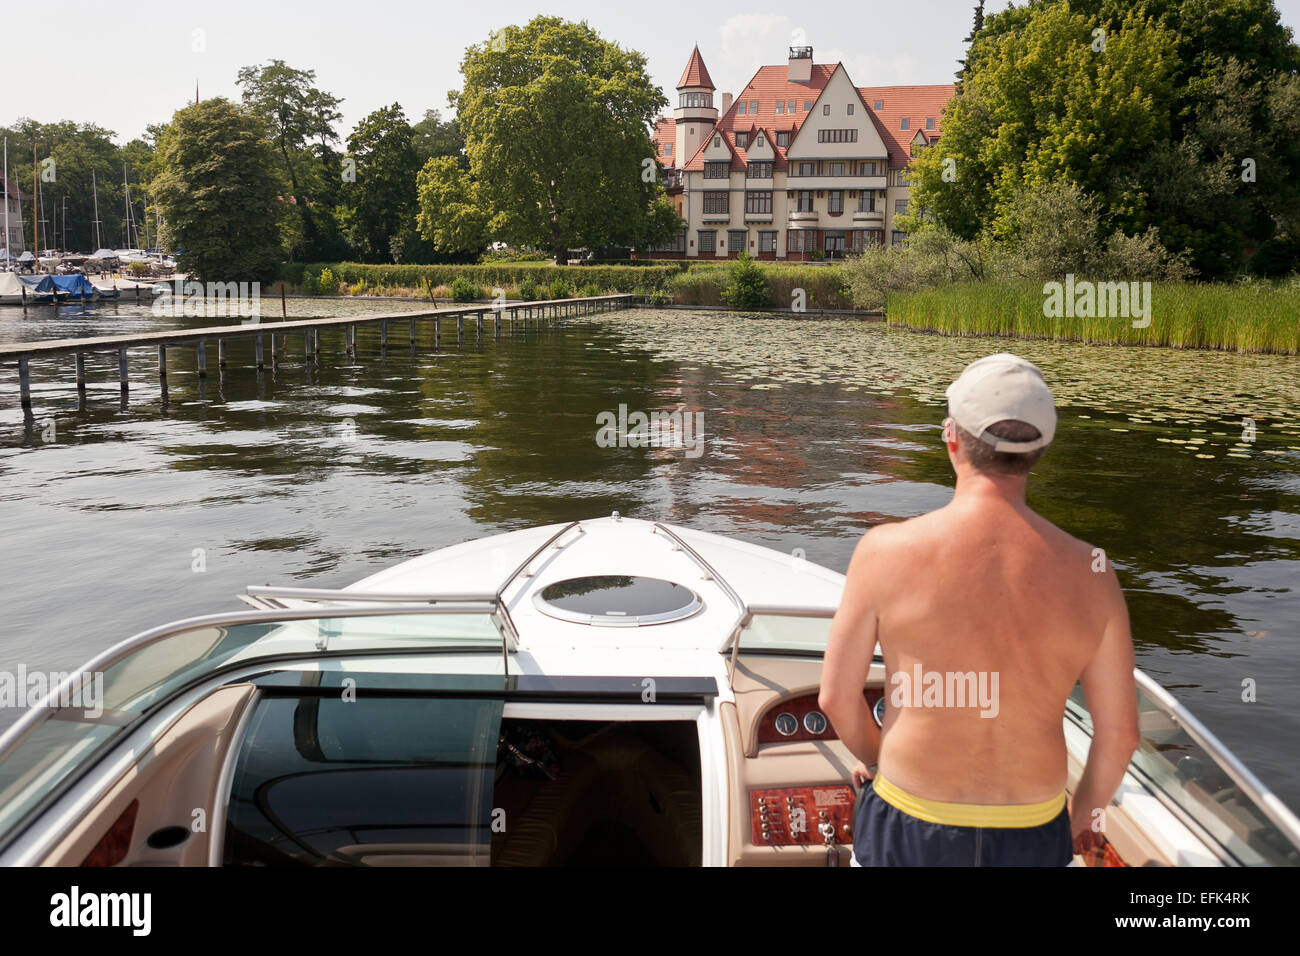 yacht owner driving his boat head towards a luxurious country villa, photo: July 26, 2012. Stock Photo